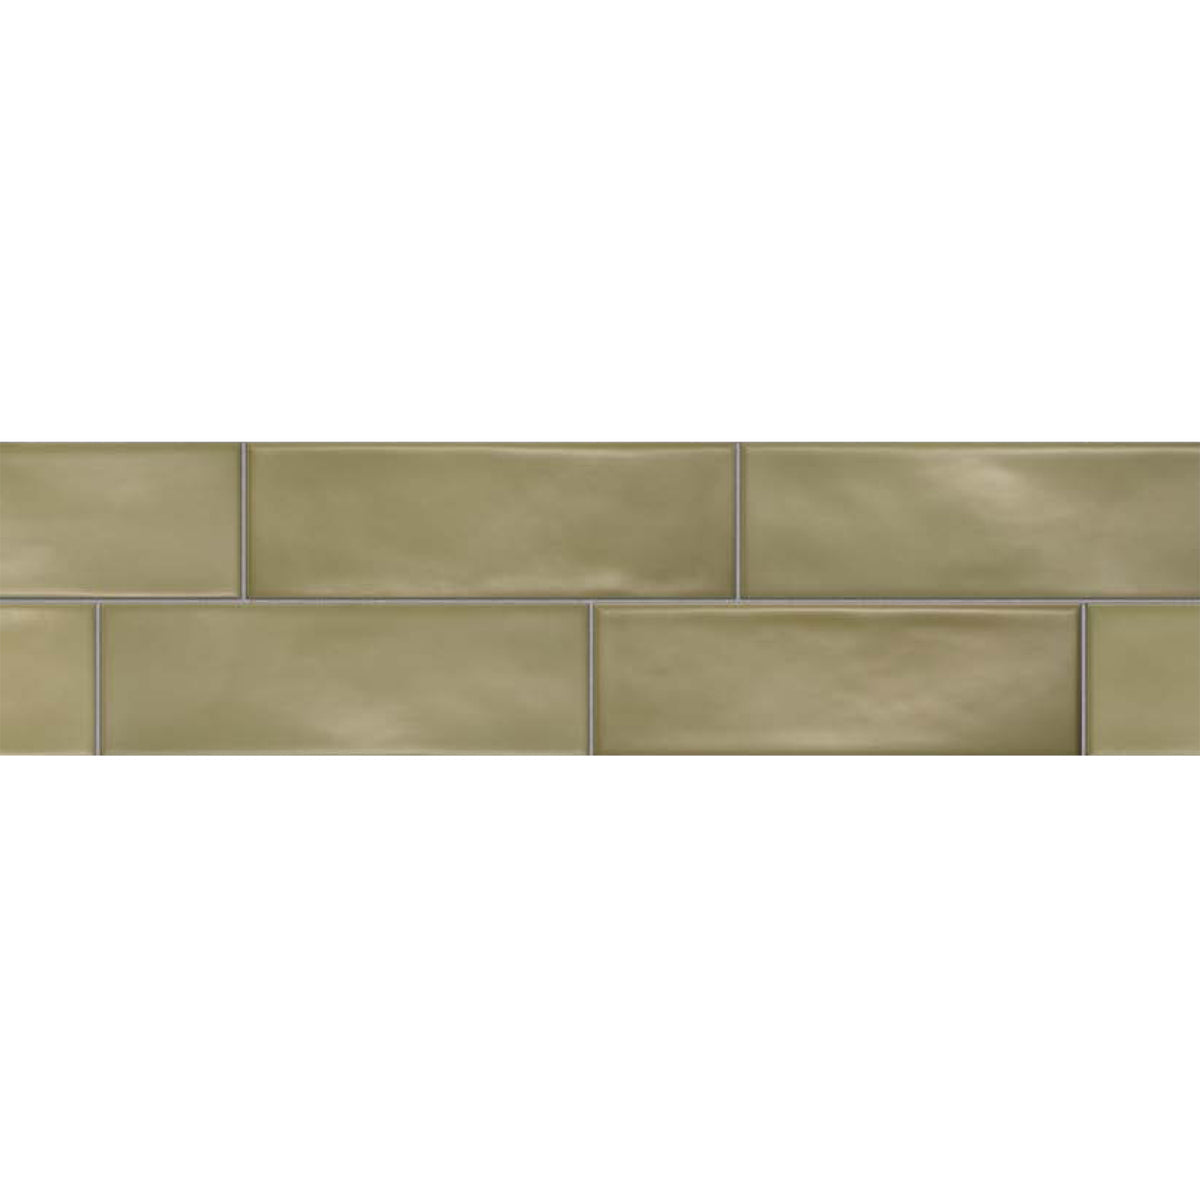 Topcu - Chalky - 2.5 in. x 8 in. Ceramic Wall Tile - Olive Installed